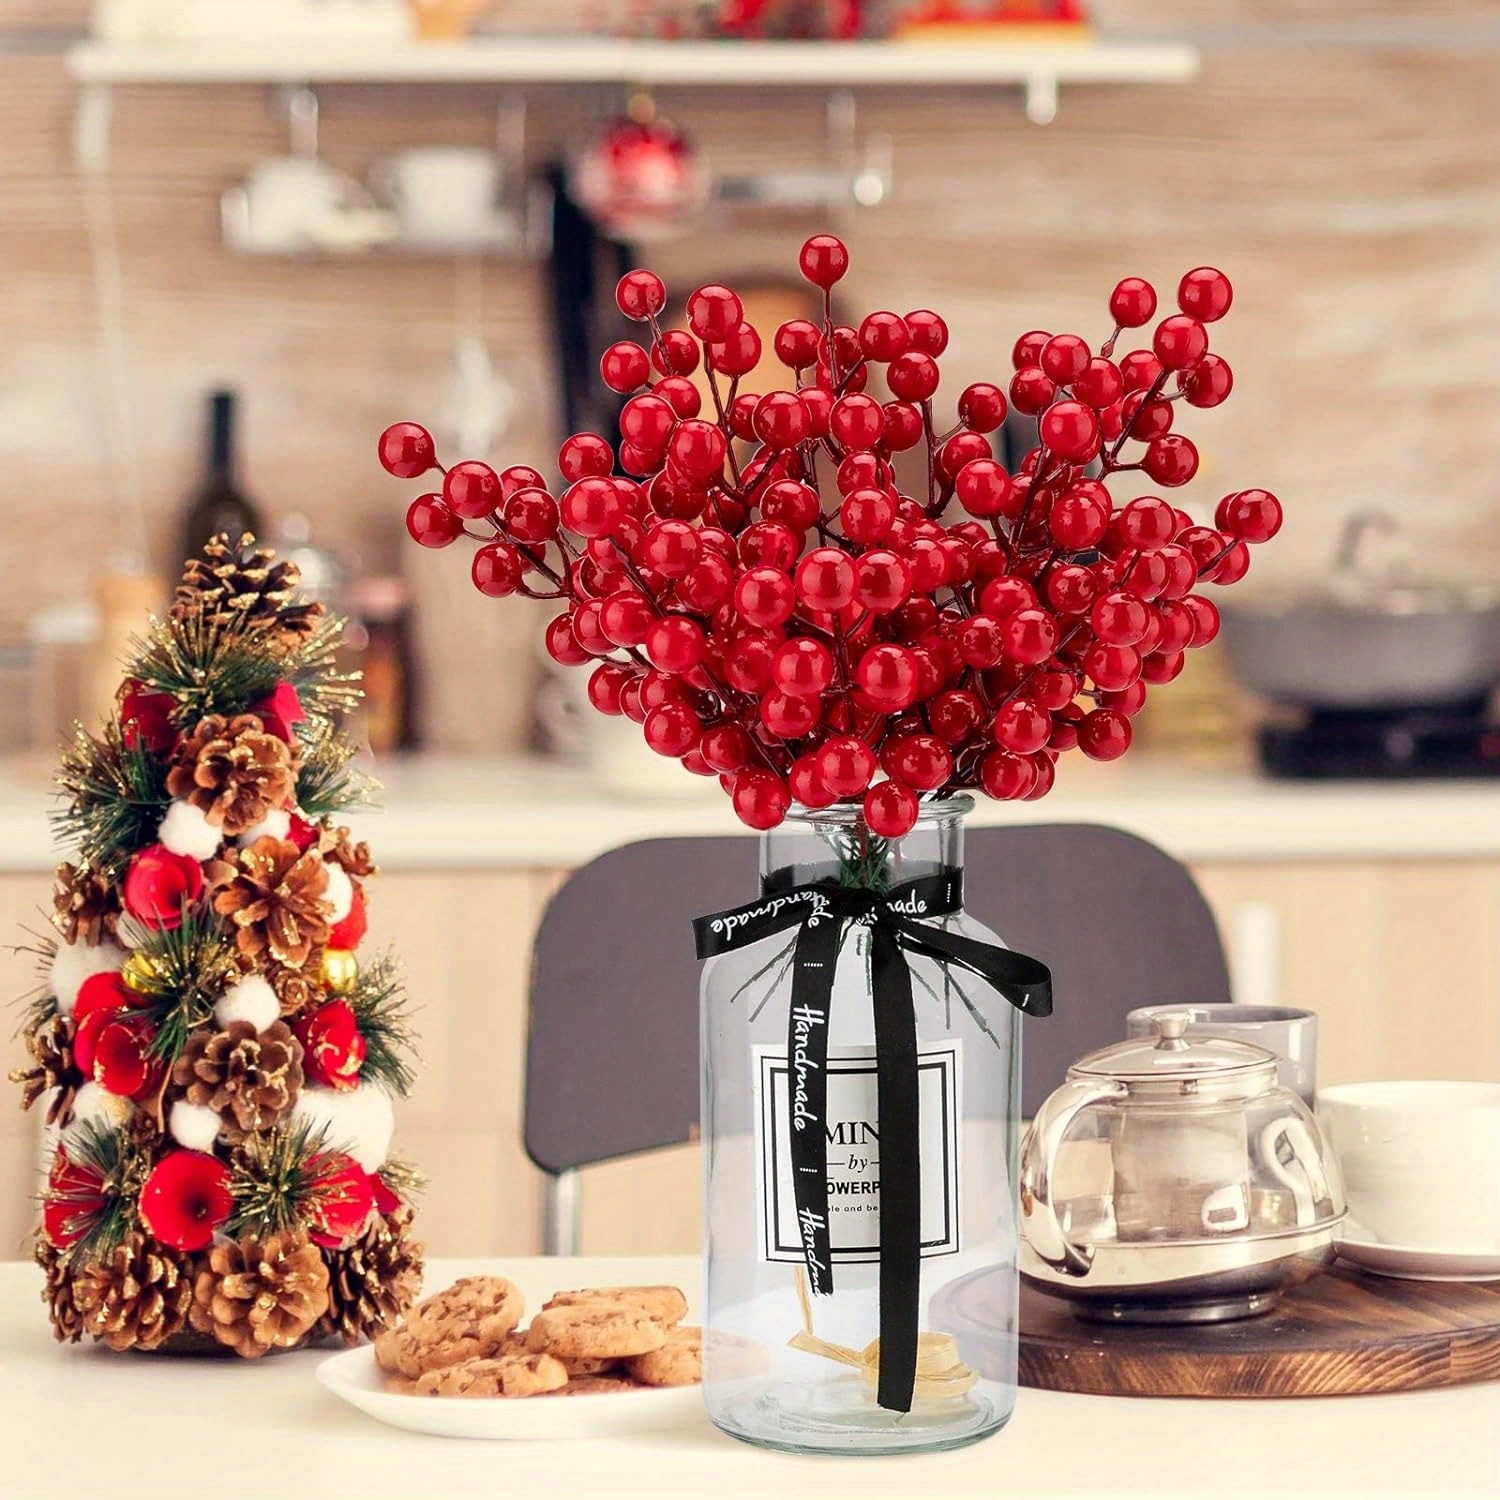 2pcs Christmas Berry Stems Artificial Holly Berries Branches Decoration  (Red)